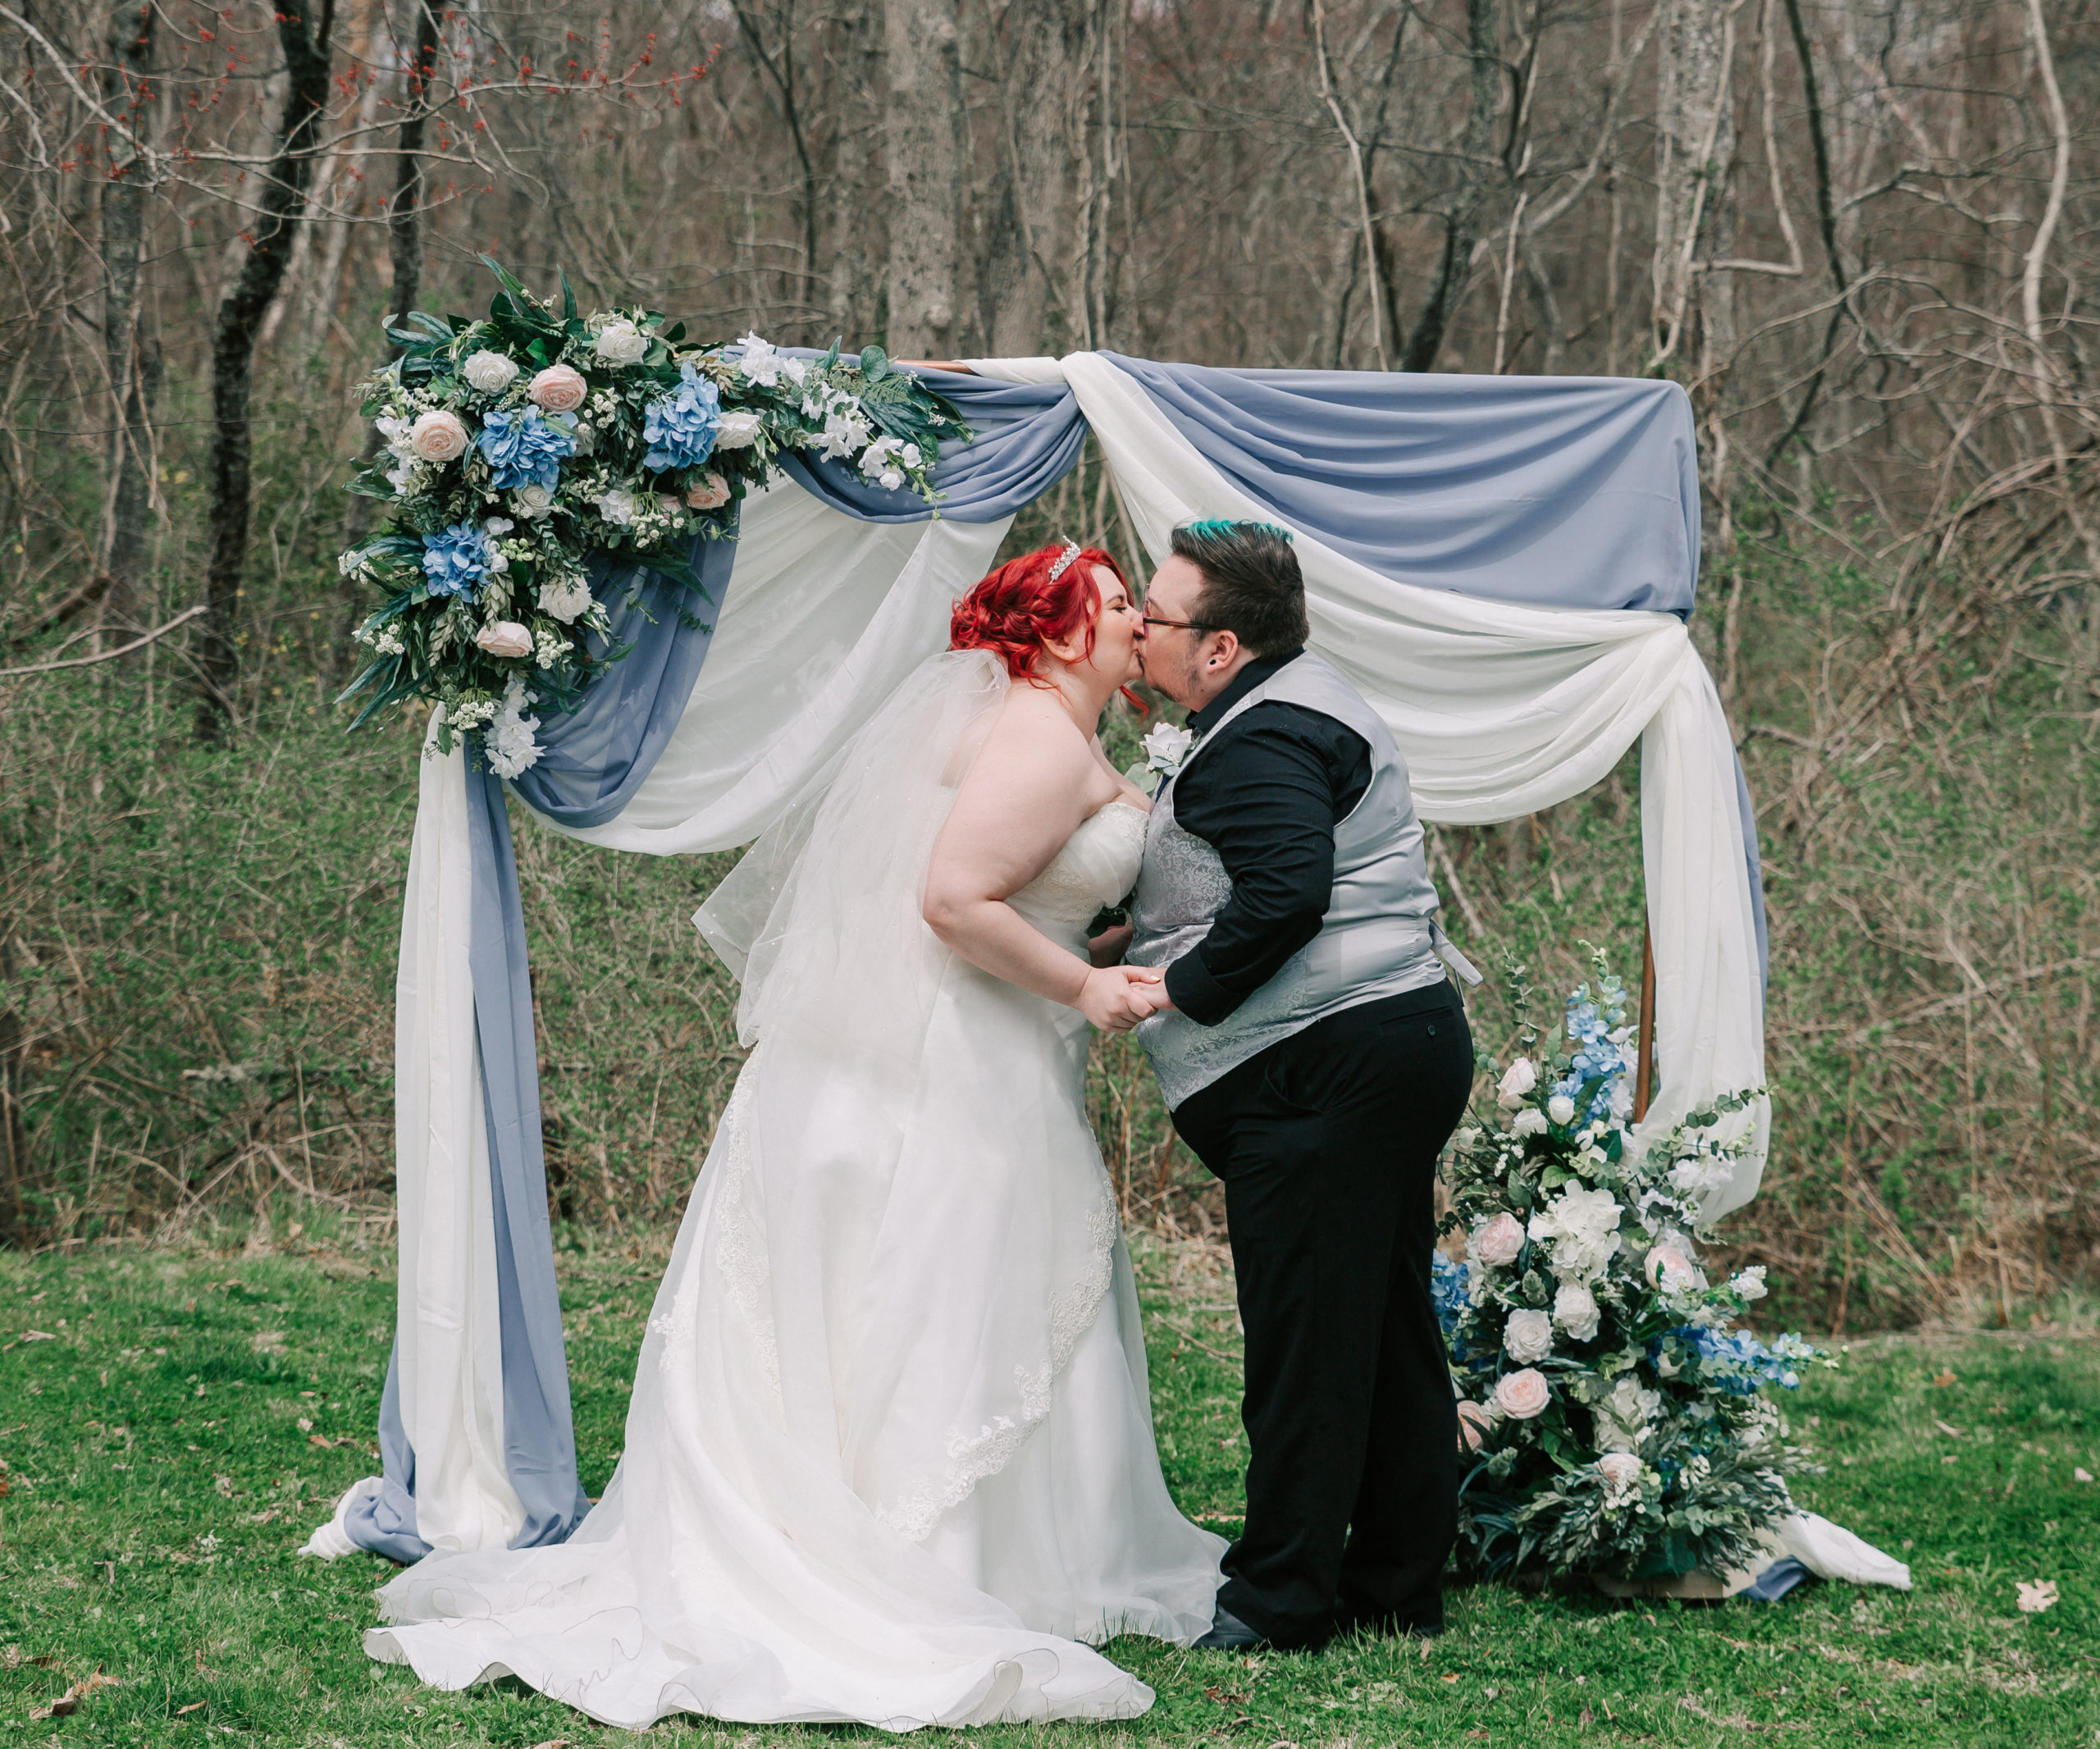 bride and groom kissing during backyard wedding ceremony planned by Events by Amy Melody, one of many talented Boston wedding planners